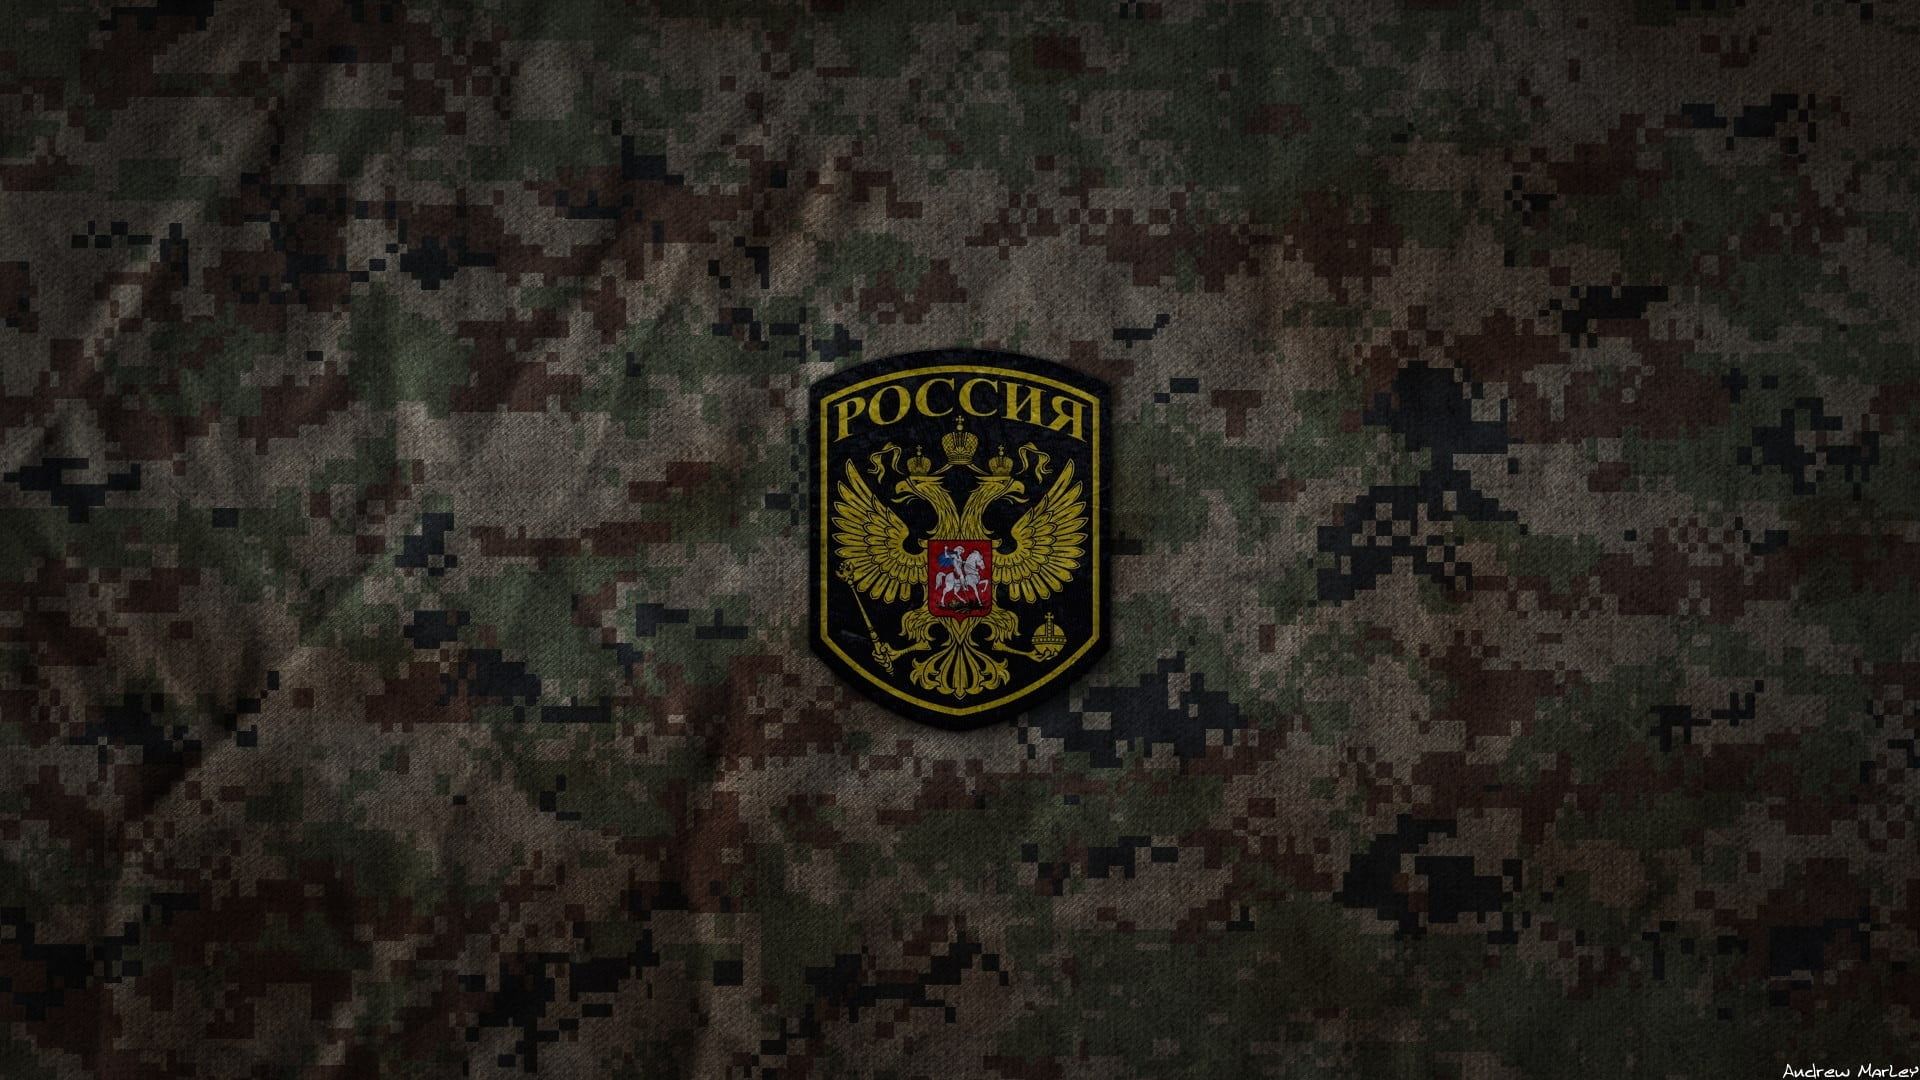 Poccnr patch #army Russian Army #camouflage #military P #wallpaper #hdwallpaper #desktop. Army wallpaper, Camouflage, Feature wallpaper